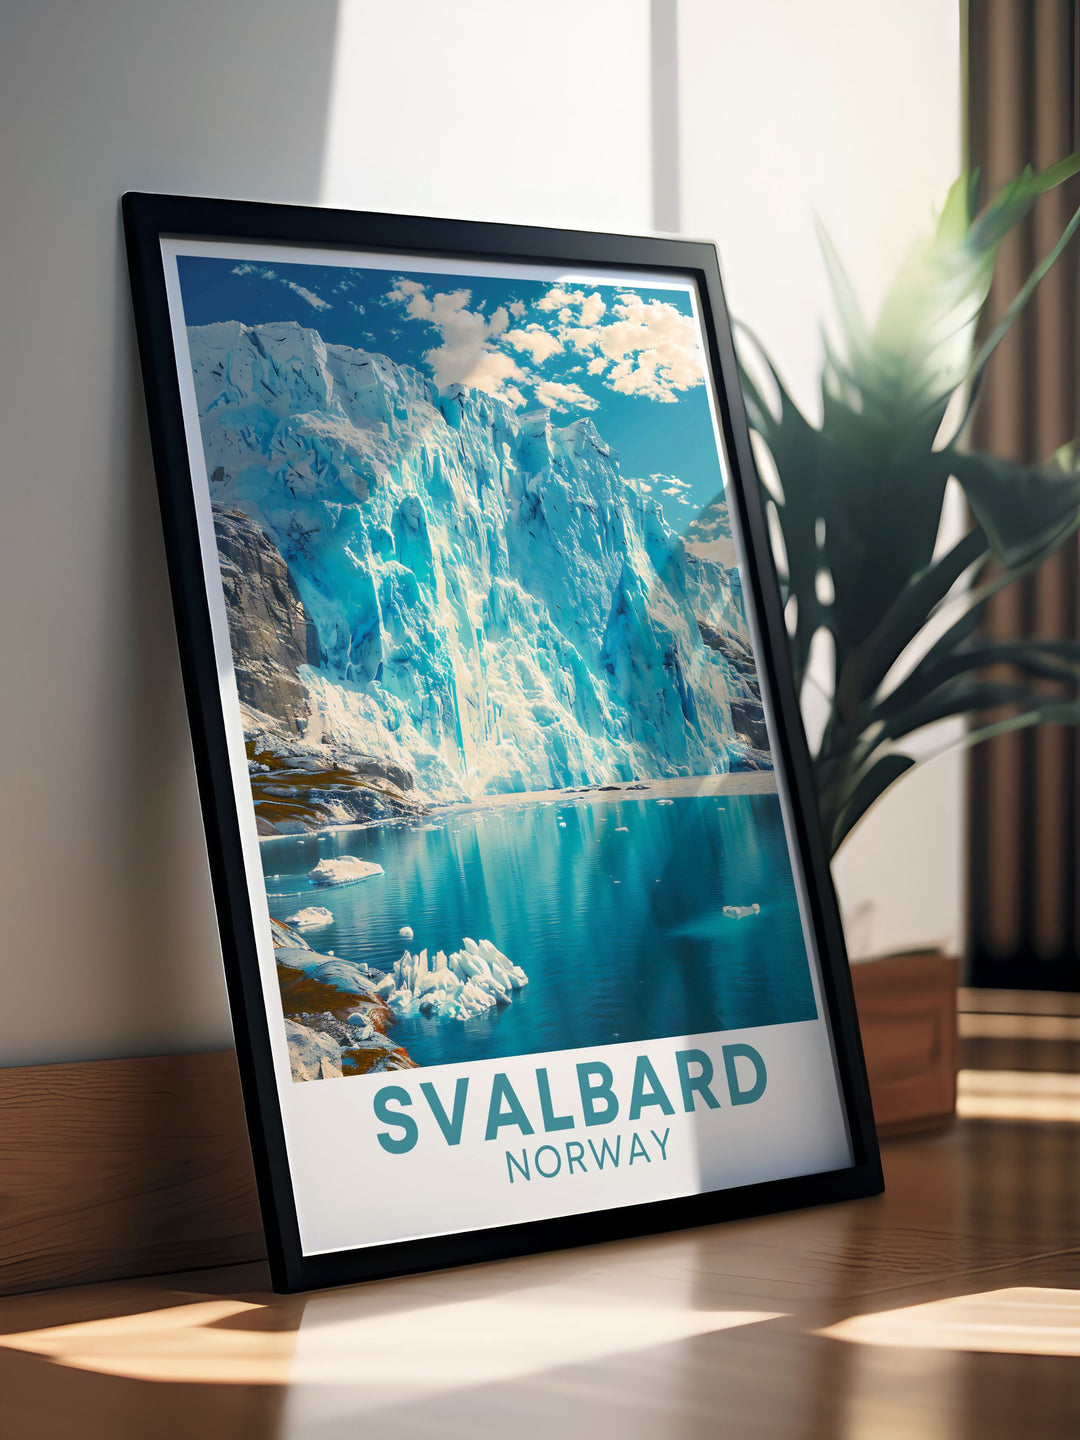 Beautiful Svalbard photography featuring the Nordenskiold Glacier against the Arctic landscape. This Svalbard cityscape poster is ideal for home decor and makes a thoughtful personalized gift for any occasion.